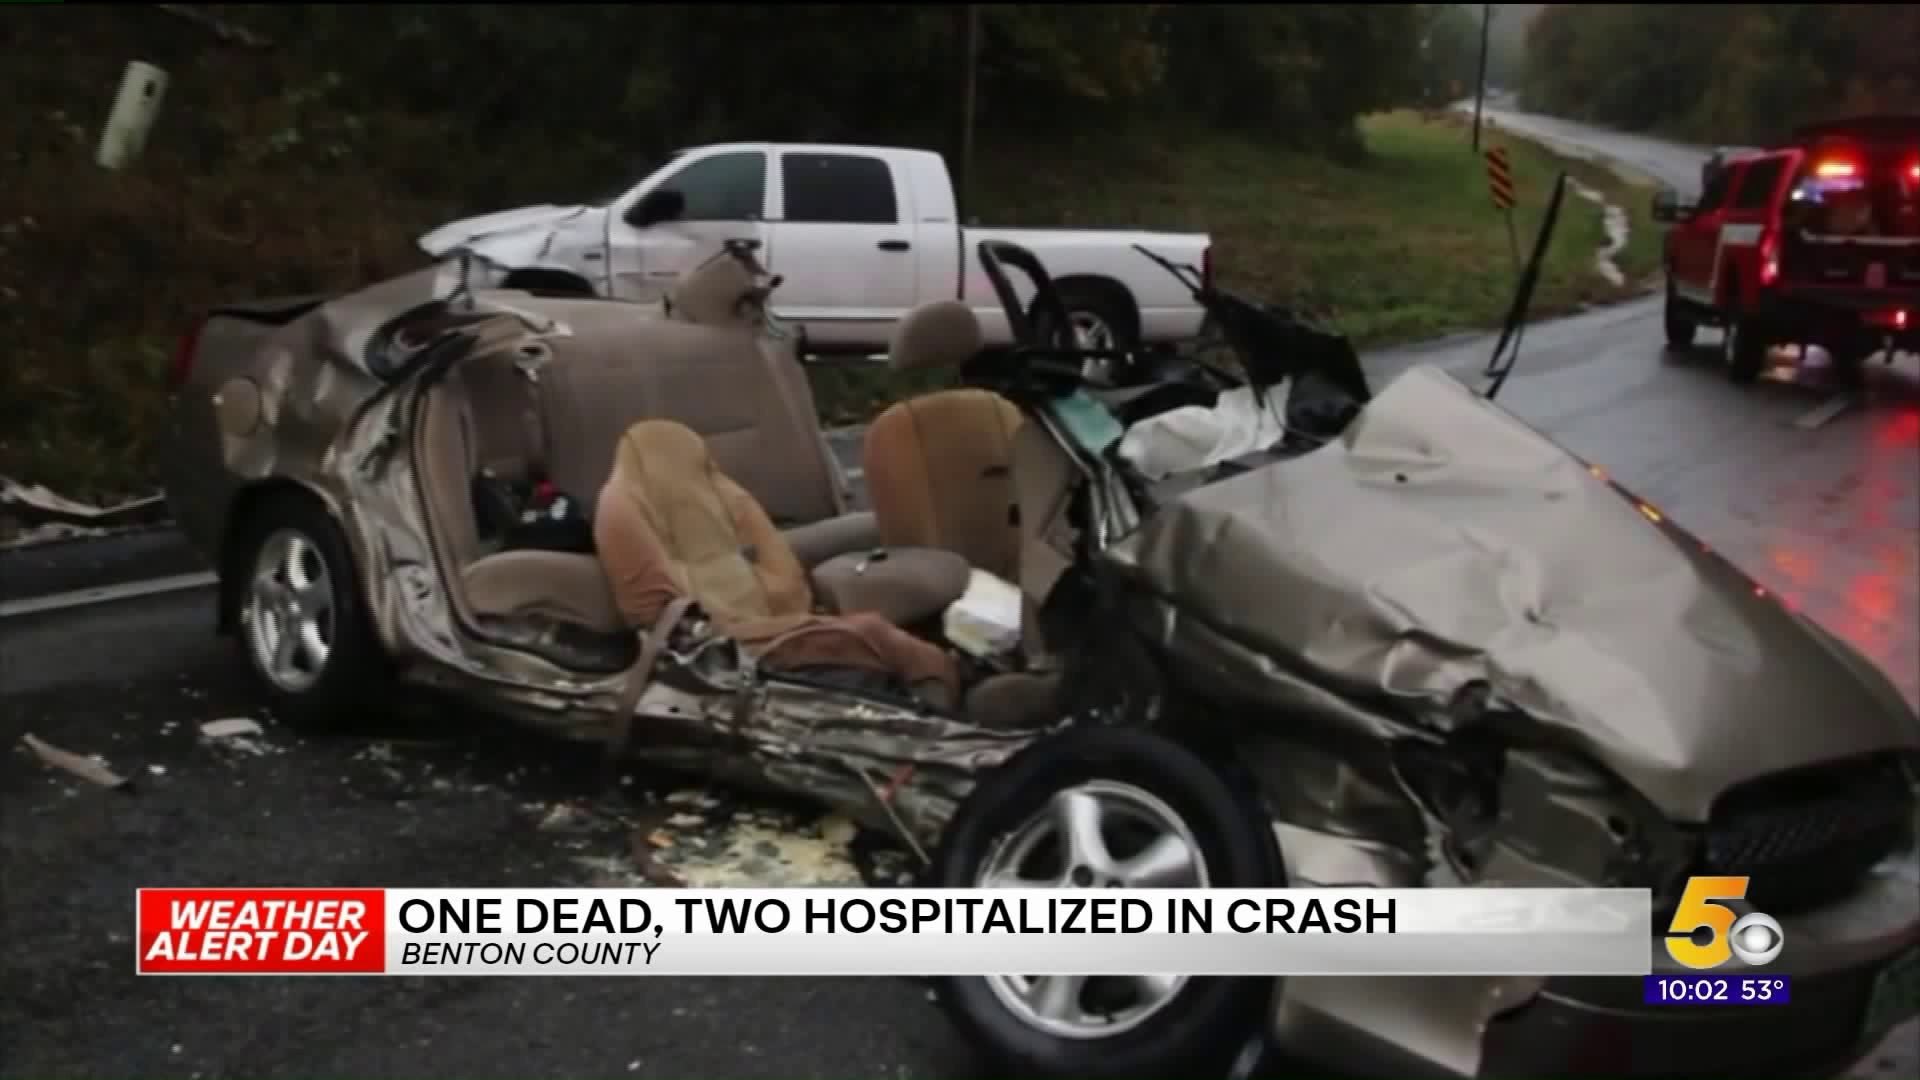 One Dead, Two Hospitalized in Crash in Benton County